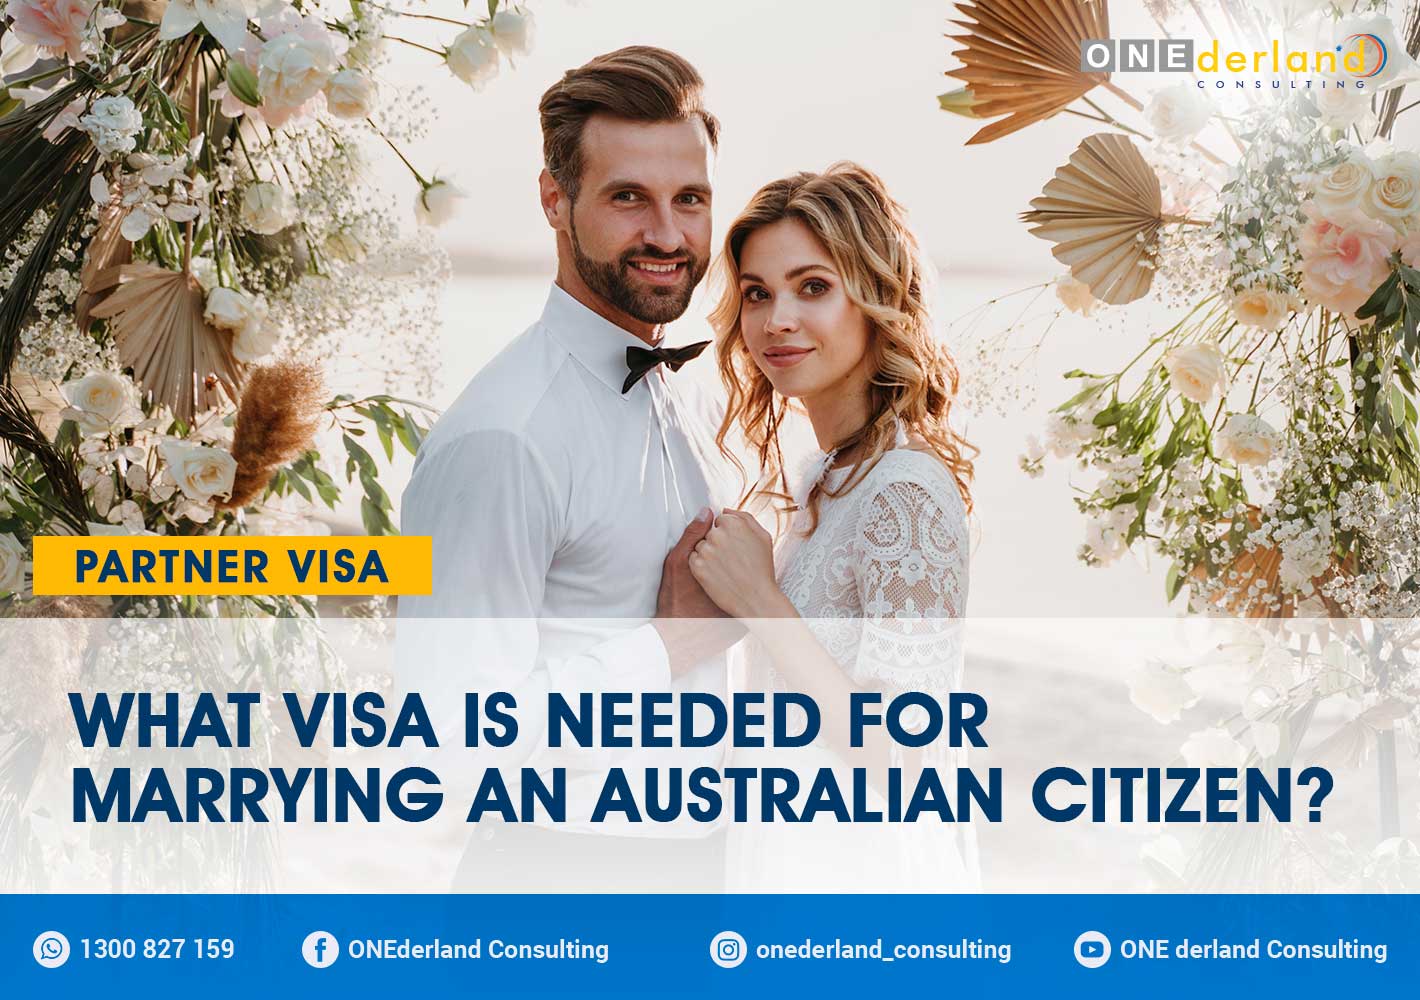 What visa is needed for marrying an Australian Citizen